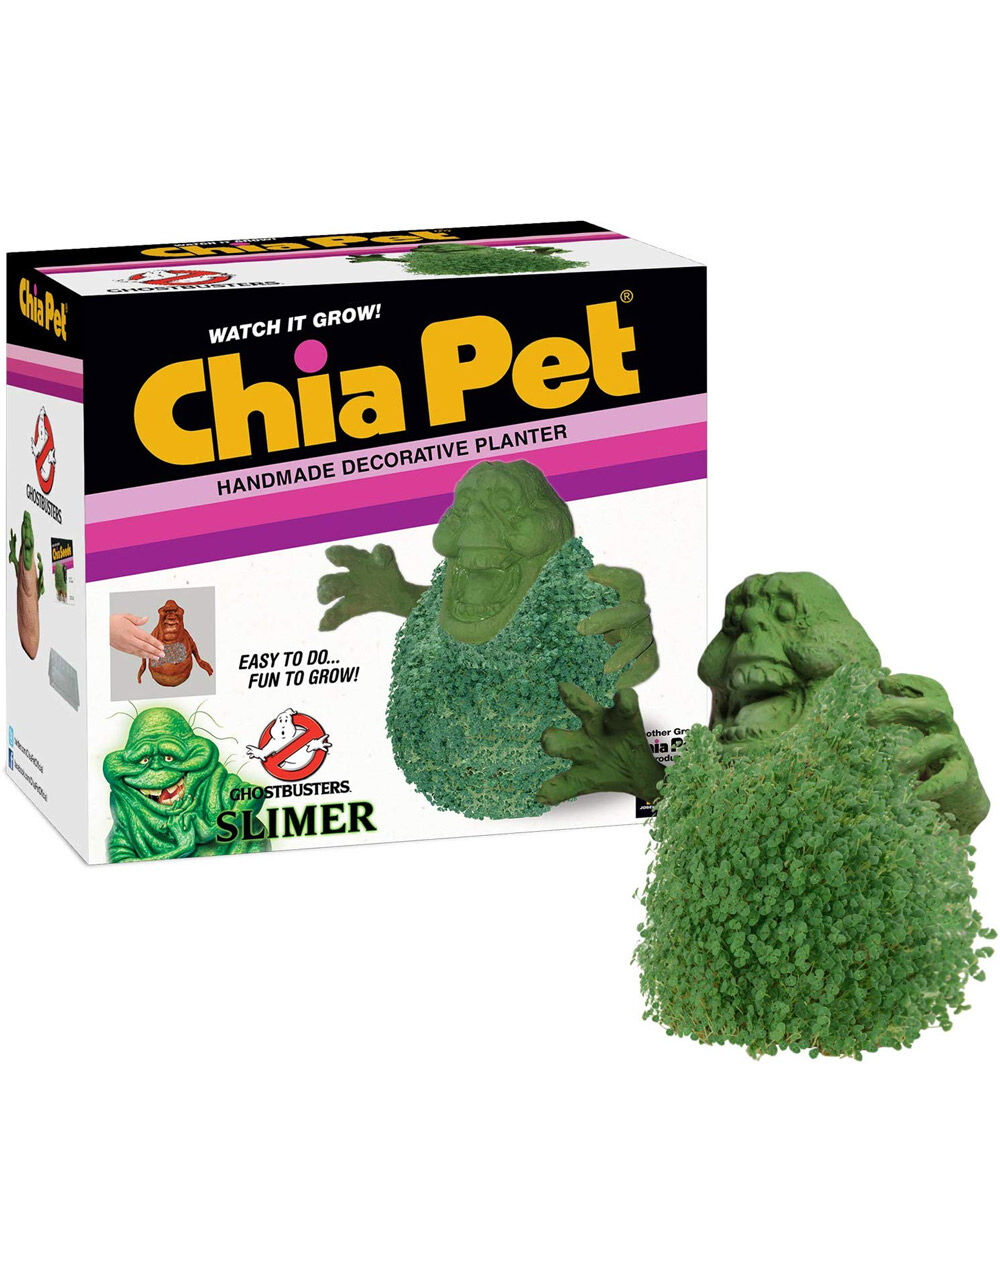 Ghostbusters Slimer Chia Pet image number 0